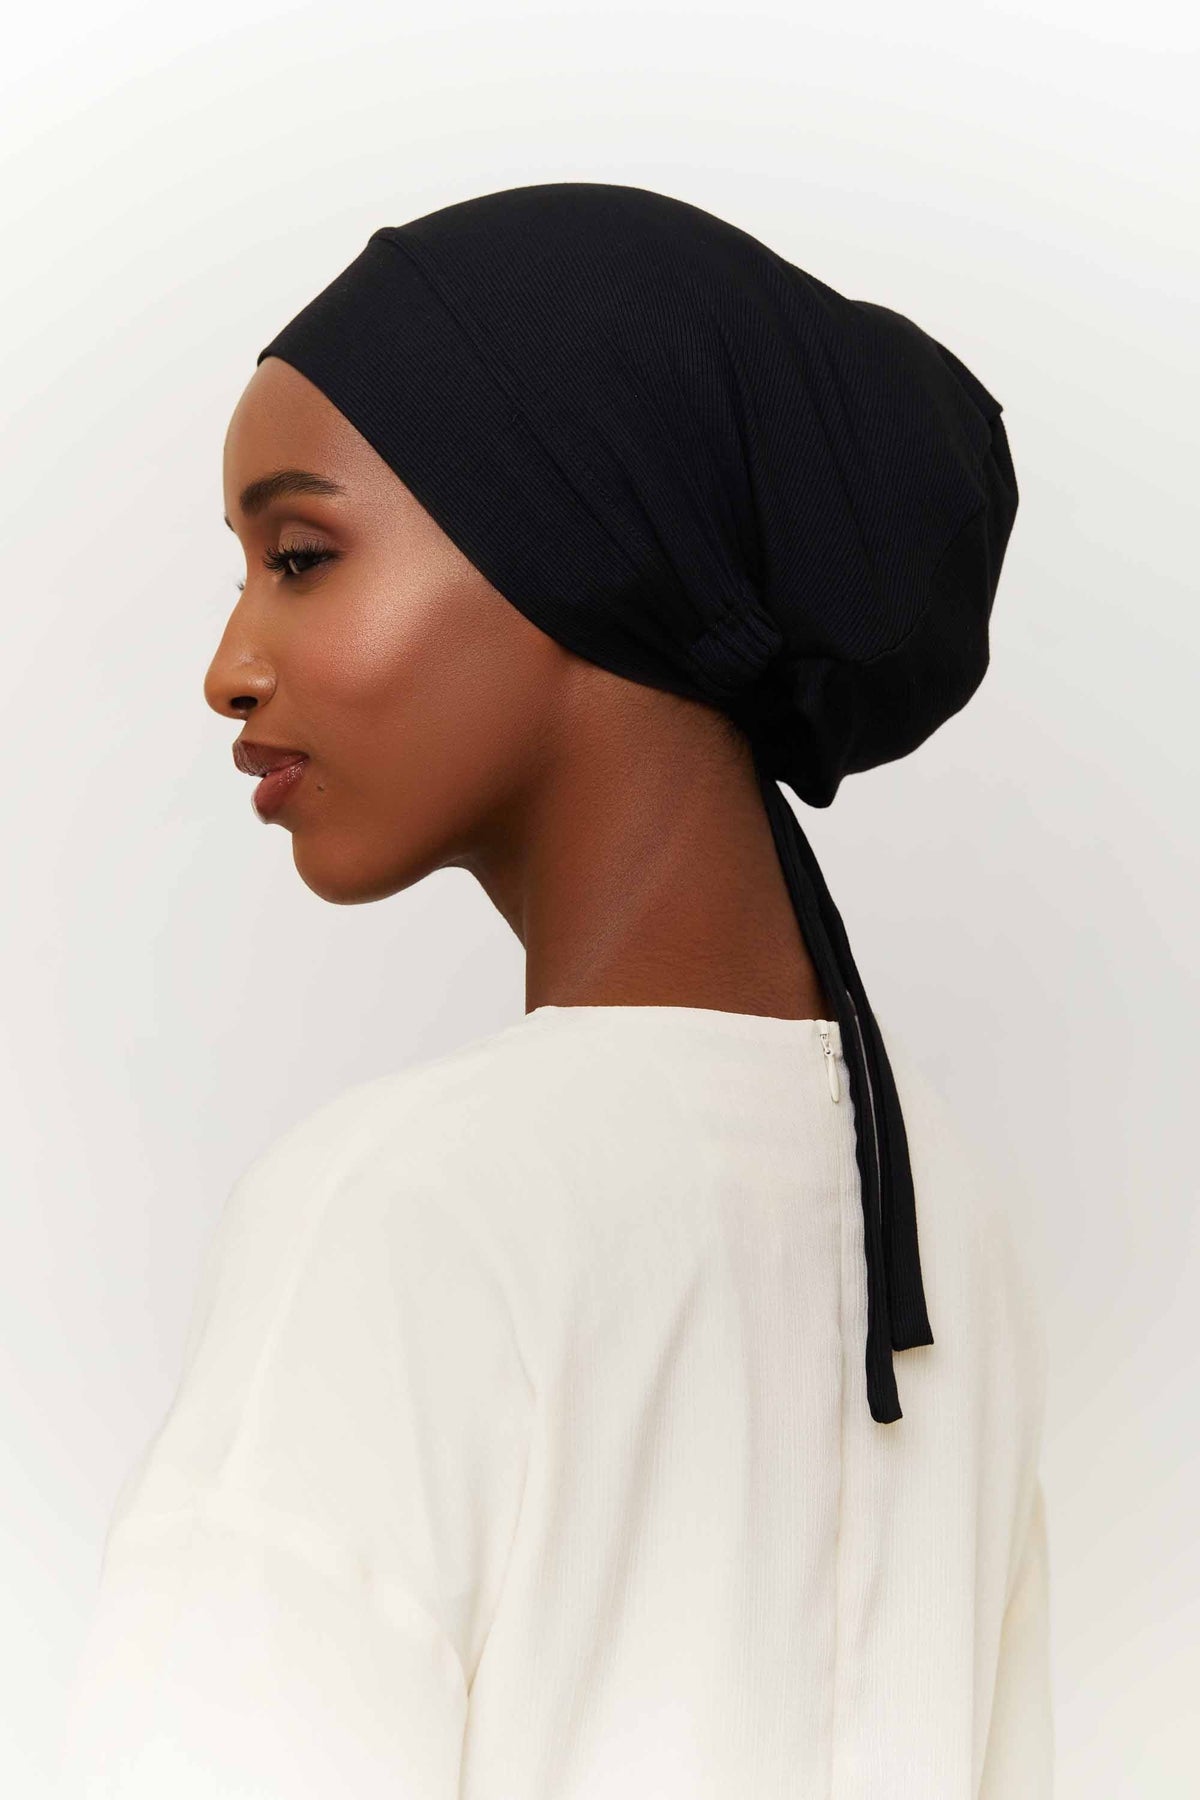 Ribbed Tie Back Undercap - Black Extra Small Accessories Veiled 